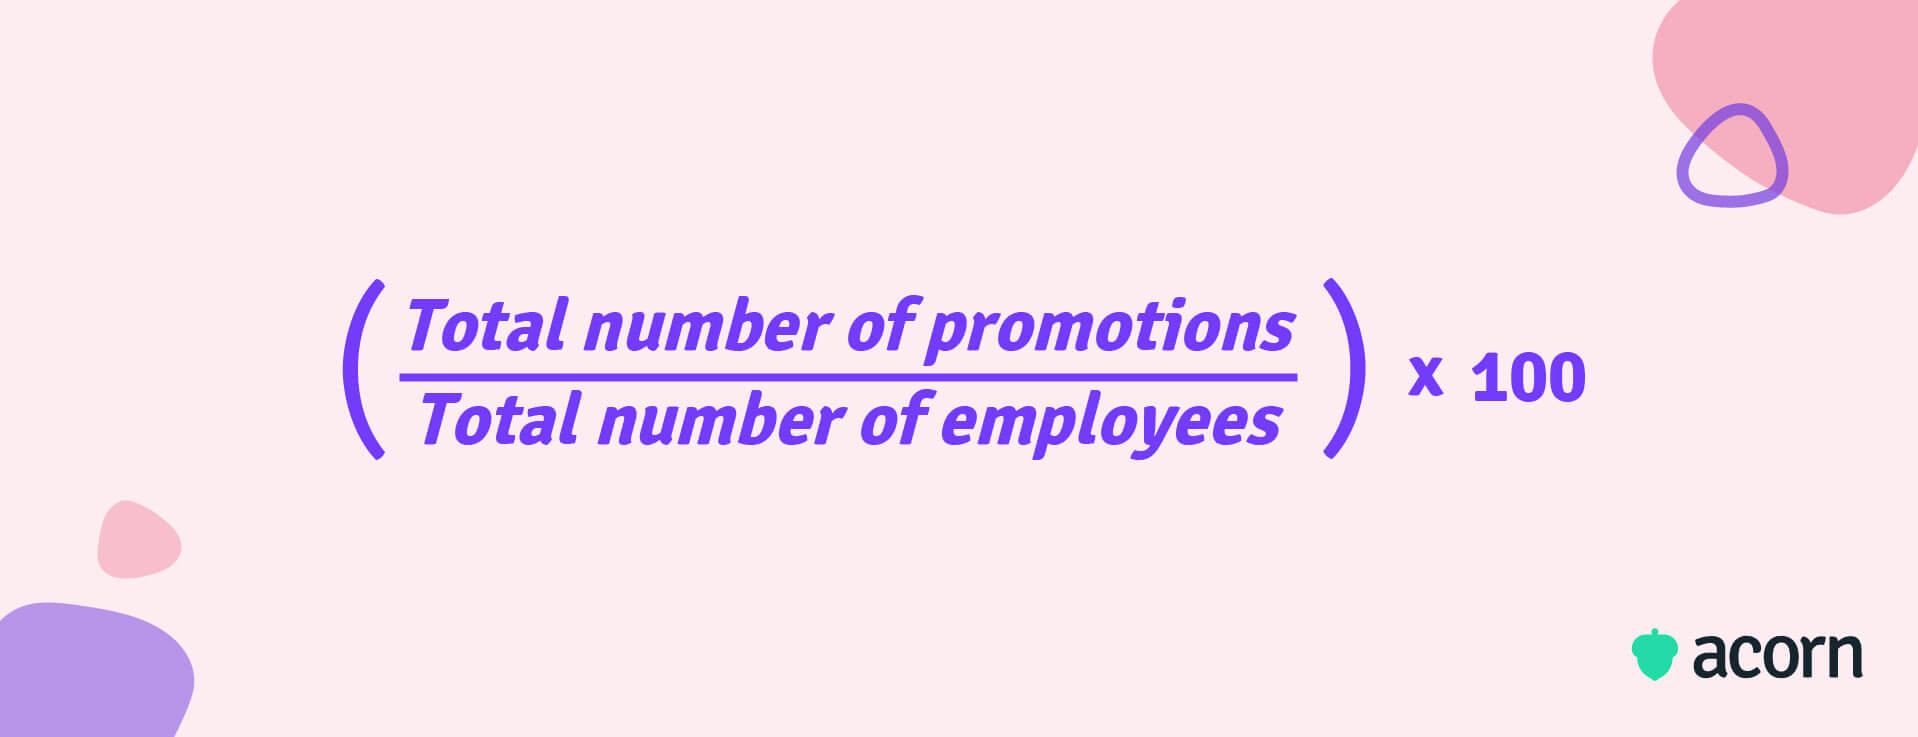 Promotion rate: (Total number of promotions/Total number of employees) x 100